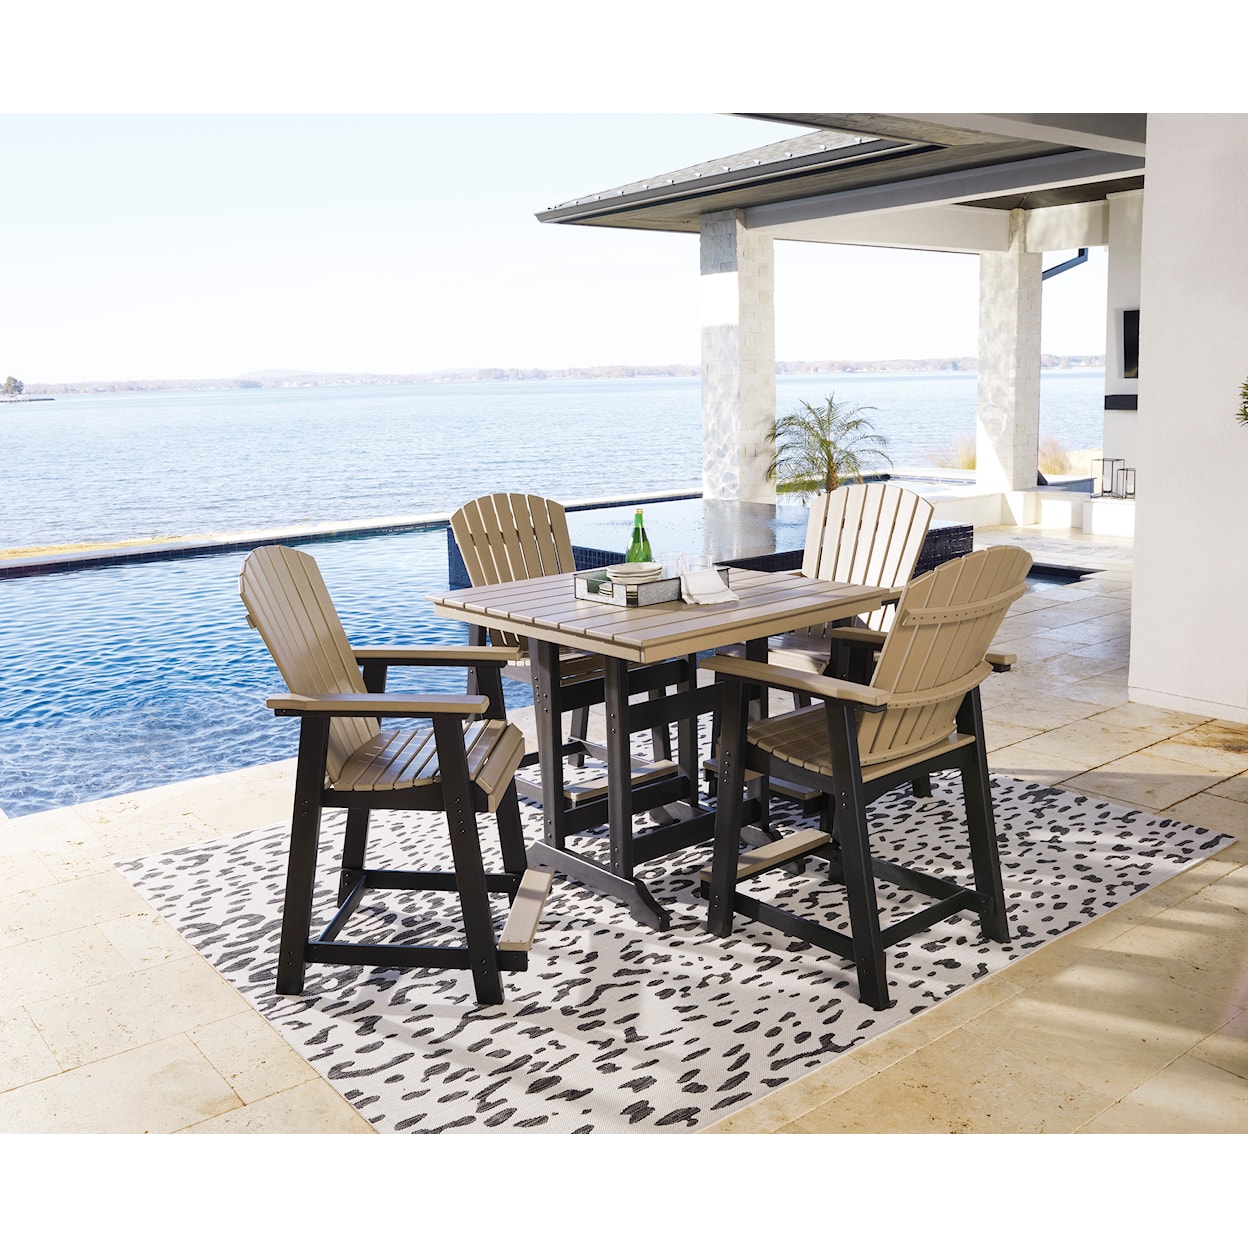 Michael Alan Select Fairen Trail Outdoor Counter Height Dining Table